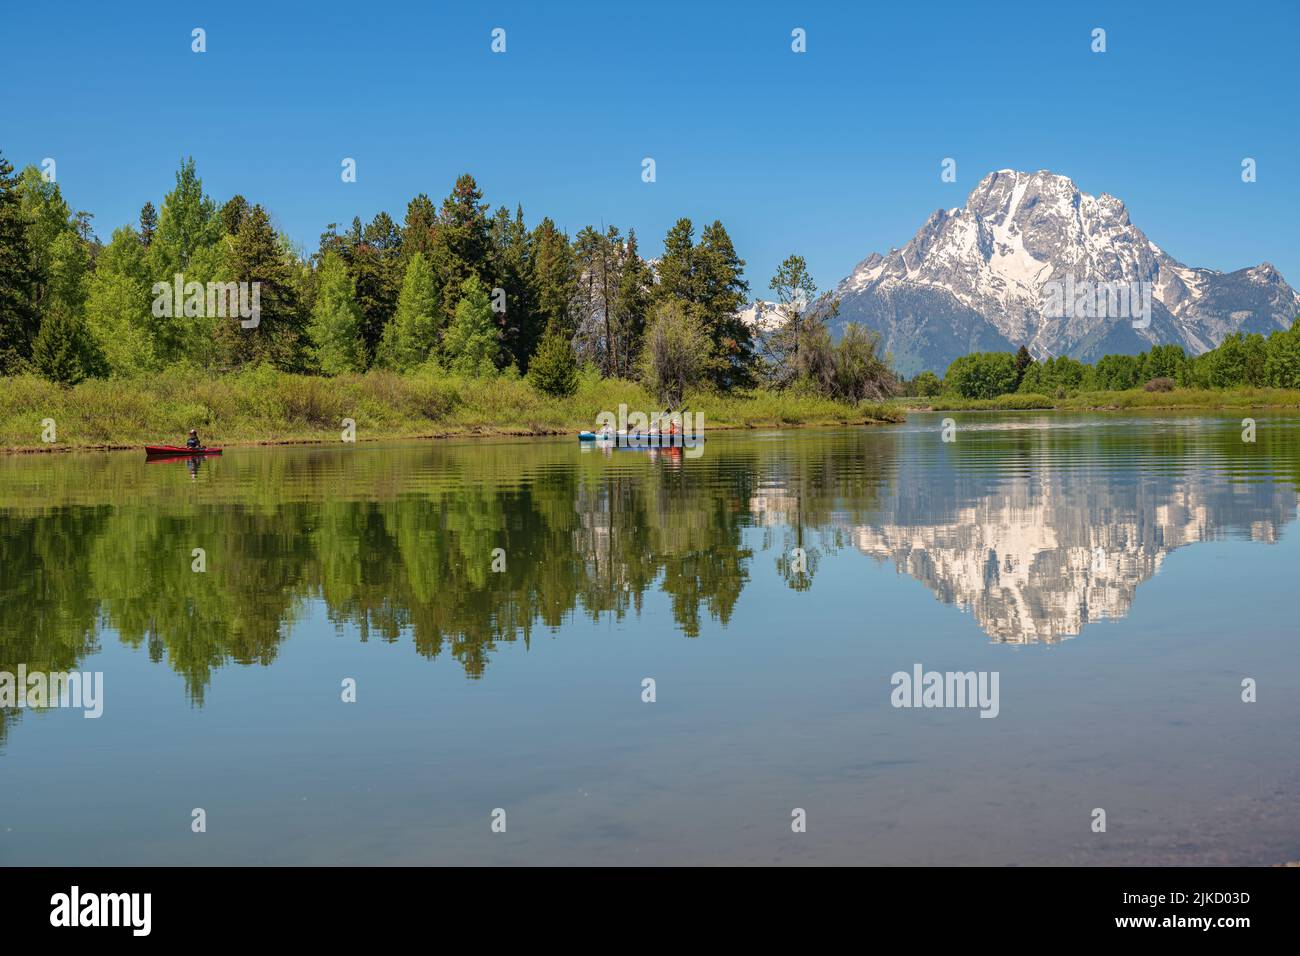 Jenny Lake kayakers and the tetons mountains wilderness. Stock Photo